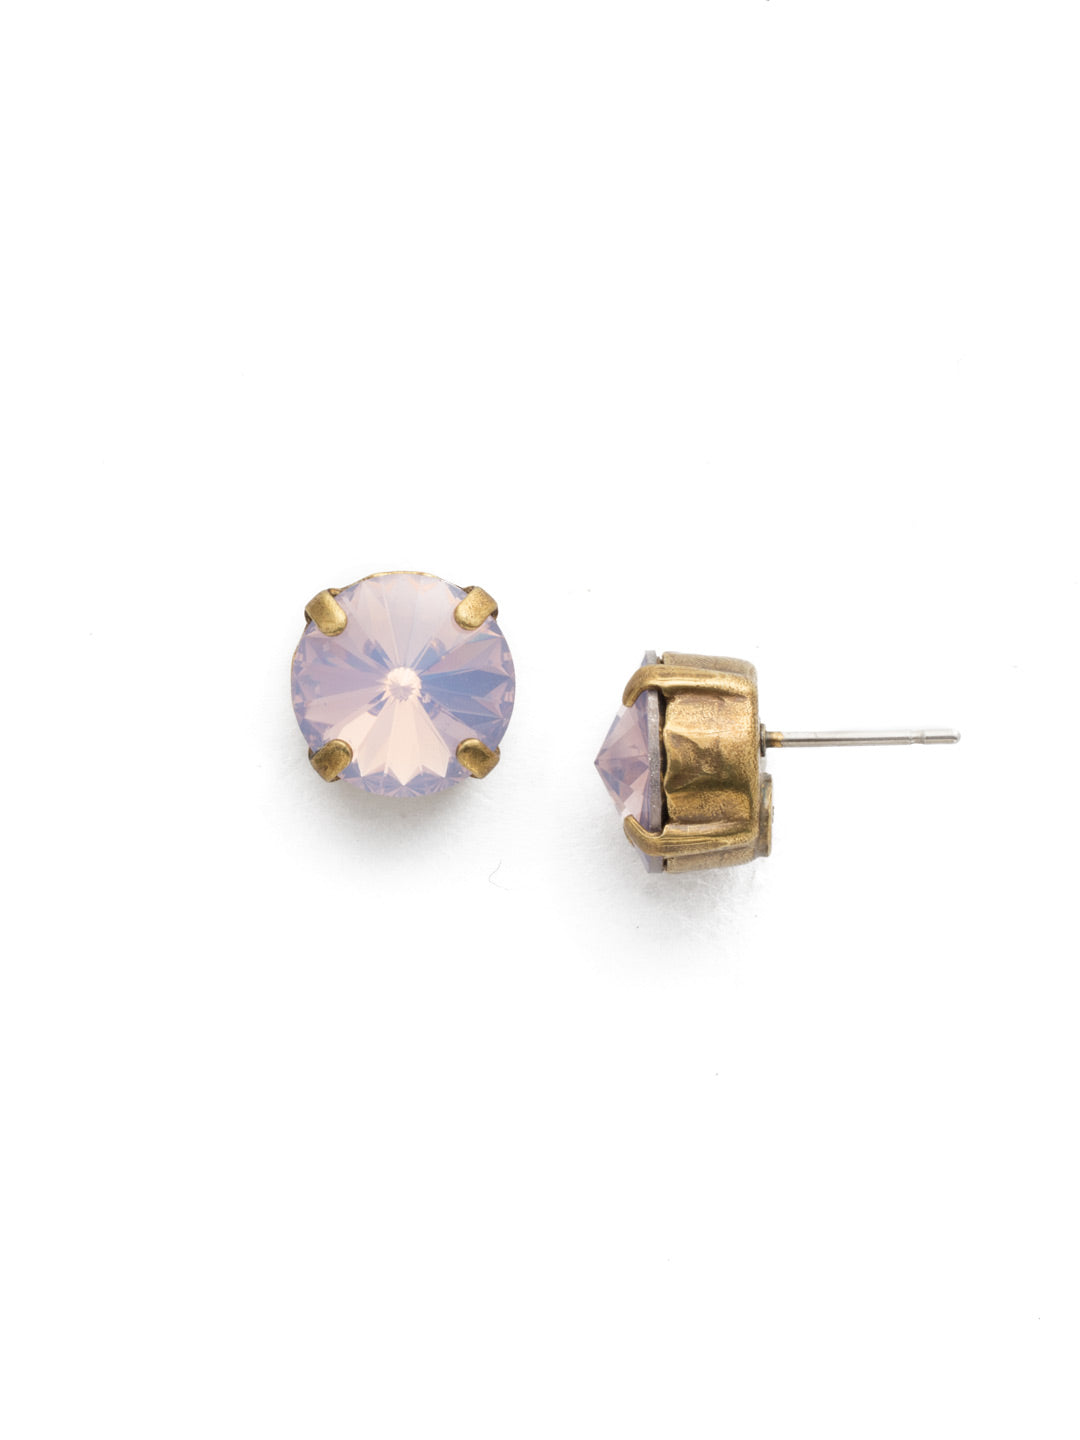 London Stud Earrings - ECM14AGROW - <p>Everyone needs a great pair of studs. Add some classic sparkle to any occasion with these stud earrings. Need help picking a stud? <a href="https://www.sorrelli.com/blogs/sisterhood/round-stud-earrings-101-a-rundown-of-sizes-styles-and-sparkle">Check out our size guide!</a> From Sorrelli's Rose Water collection in our Antique Gold-tone finish.</p>